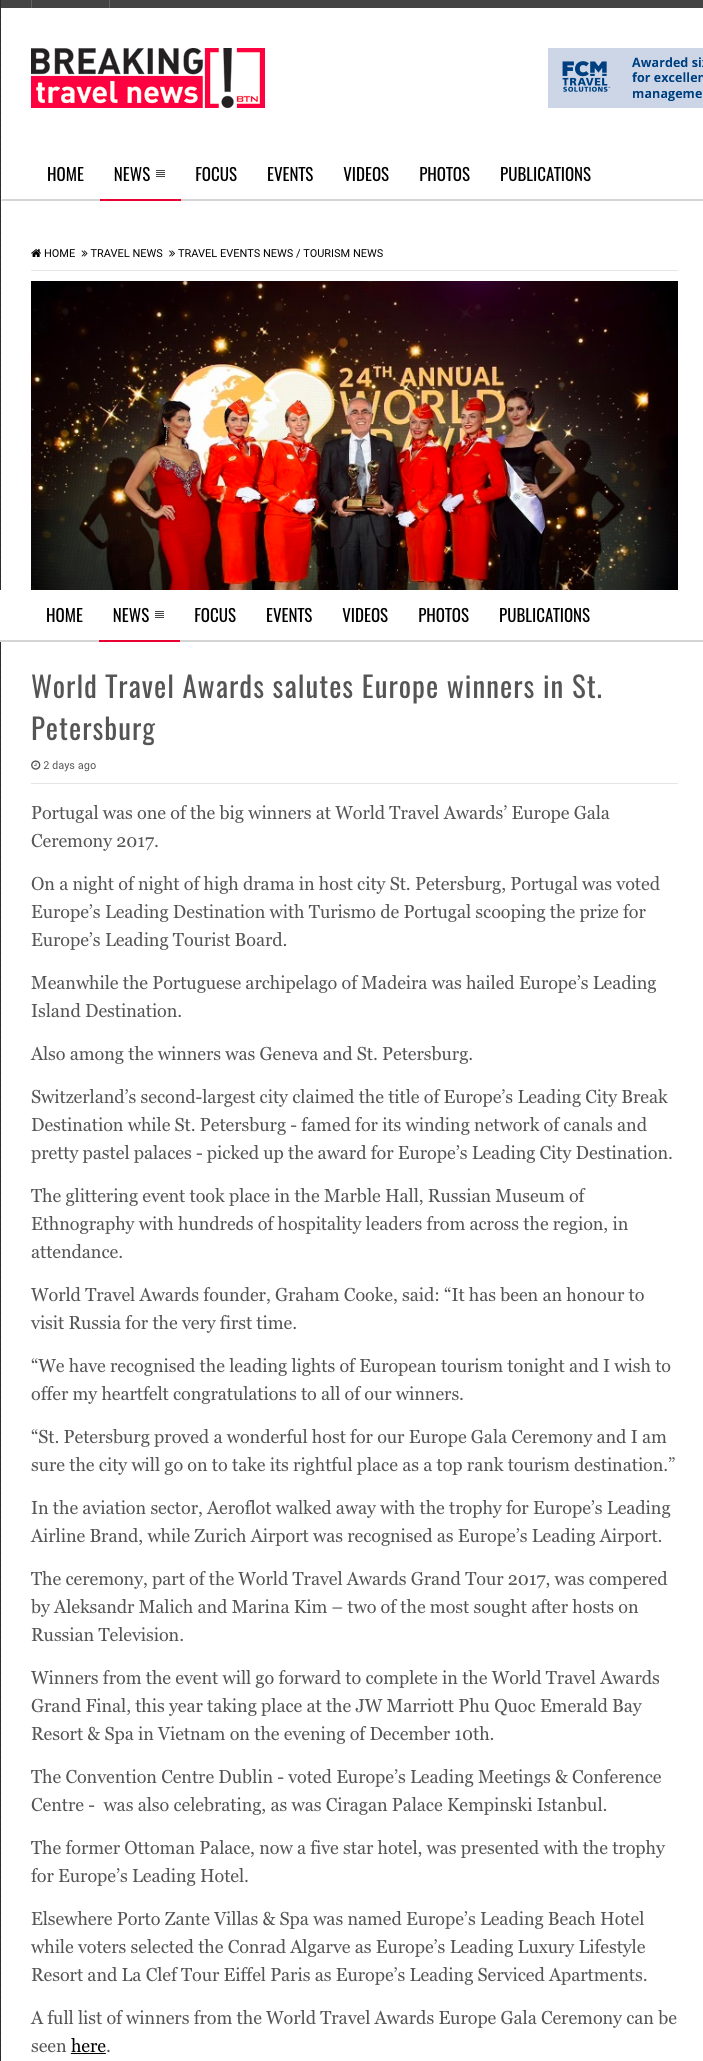 World Travel Awards president Cooke welcomed to St. Petersburg ahead of Europe Gala Ceremony